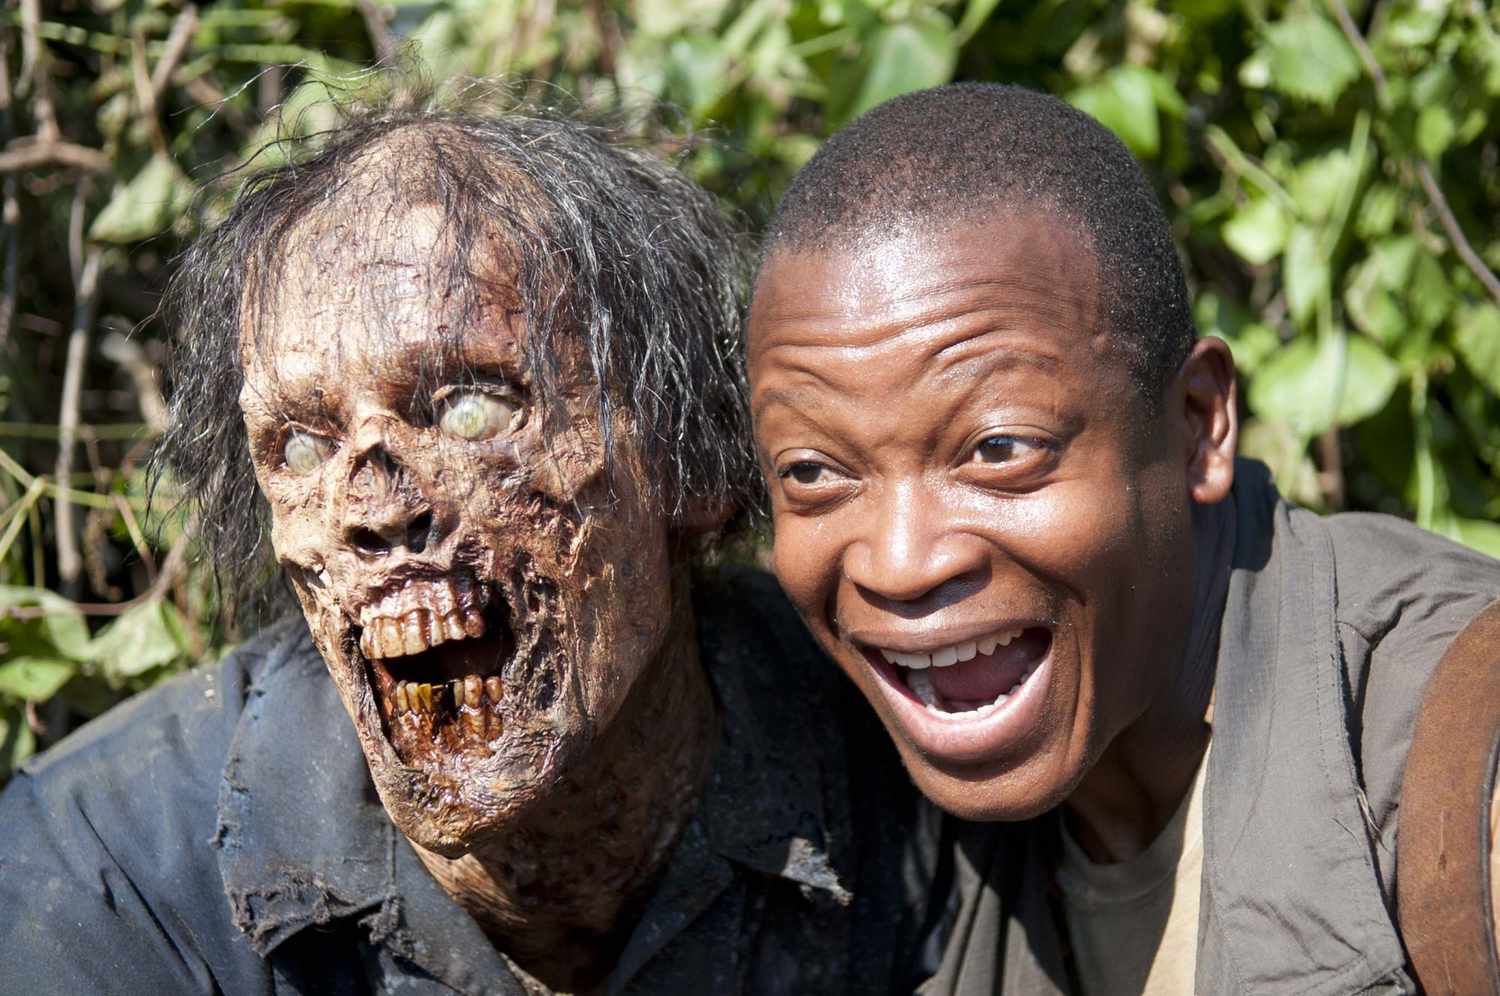 Lawrence Gilliard Jr. plays separated at birth with a walker